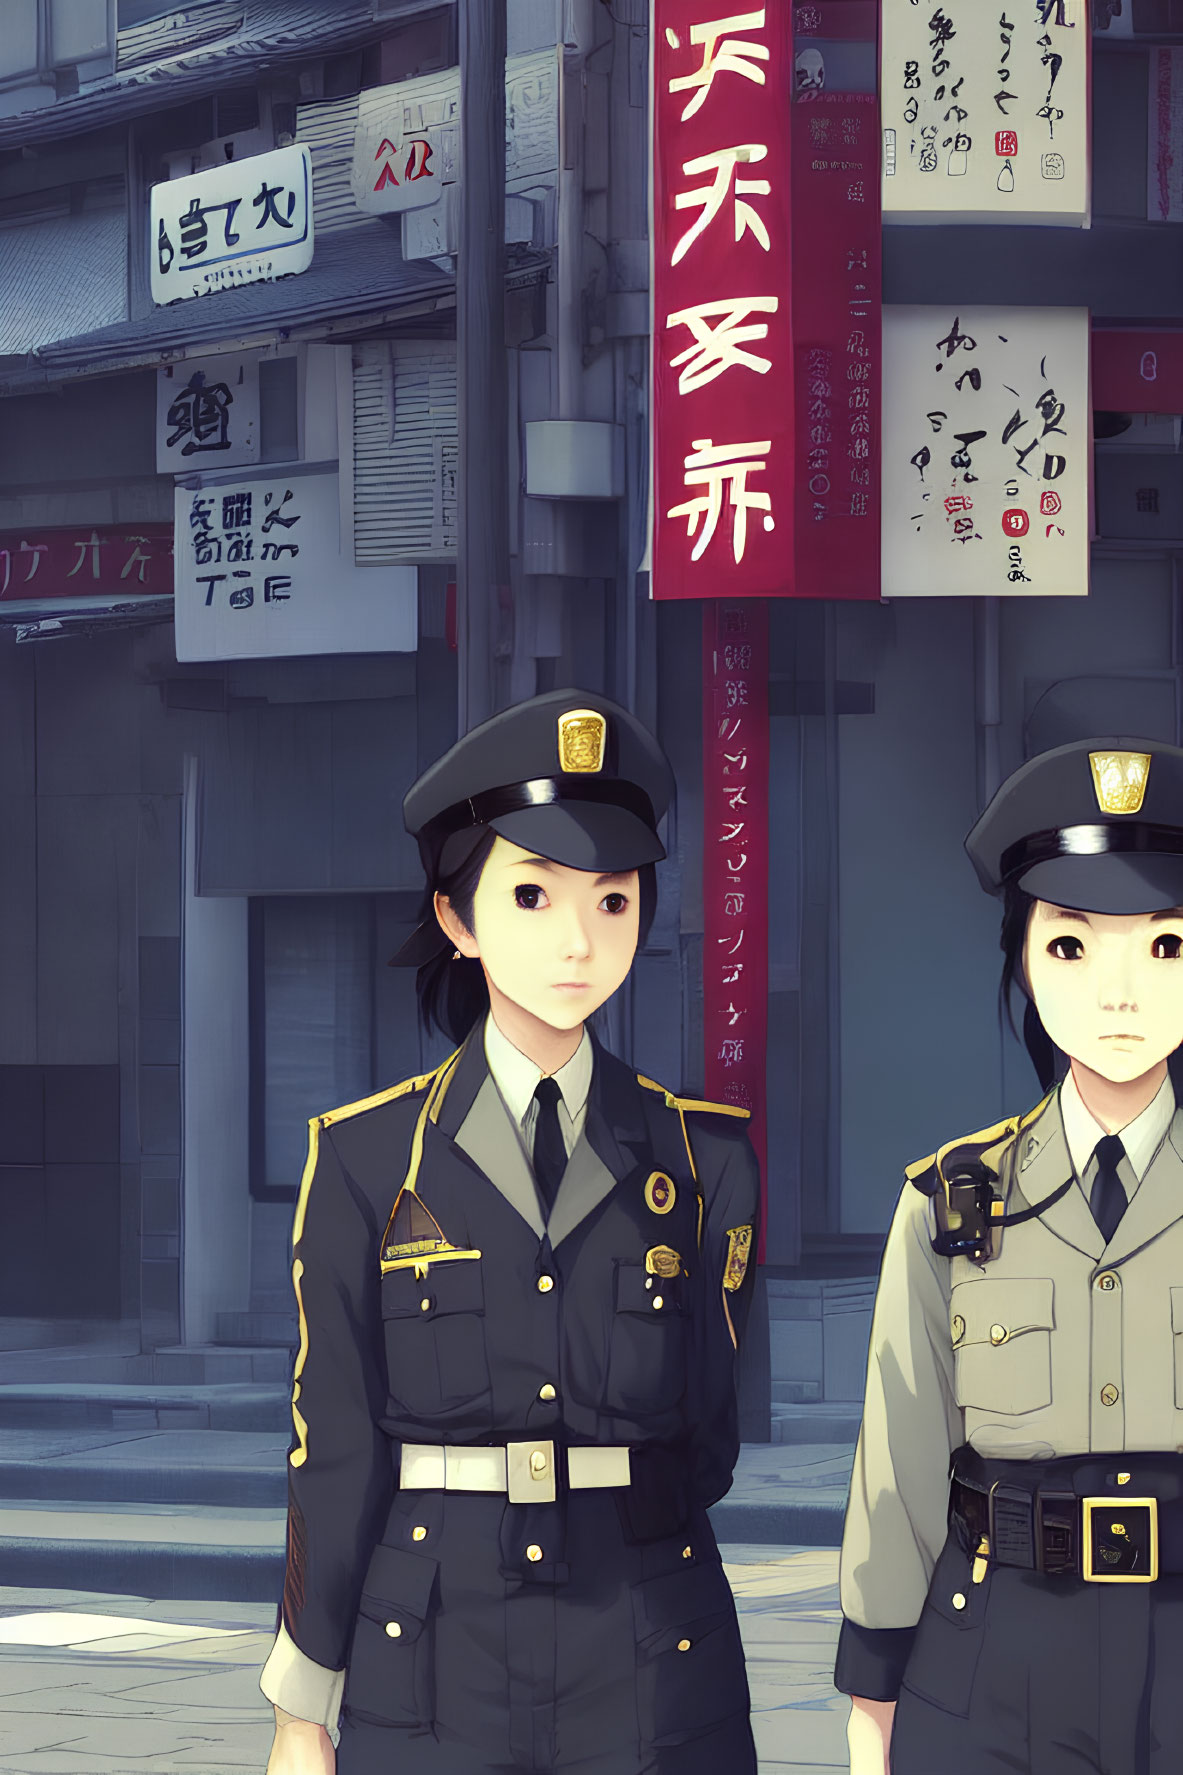 Two female police officers in uniform on a street with Japanese signs.